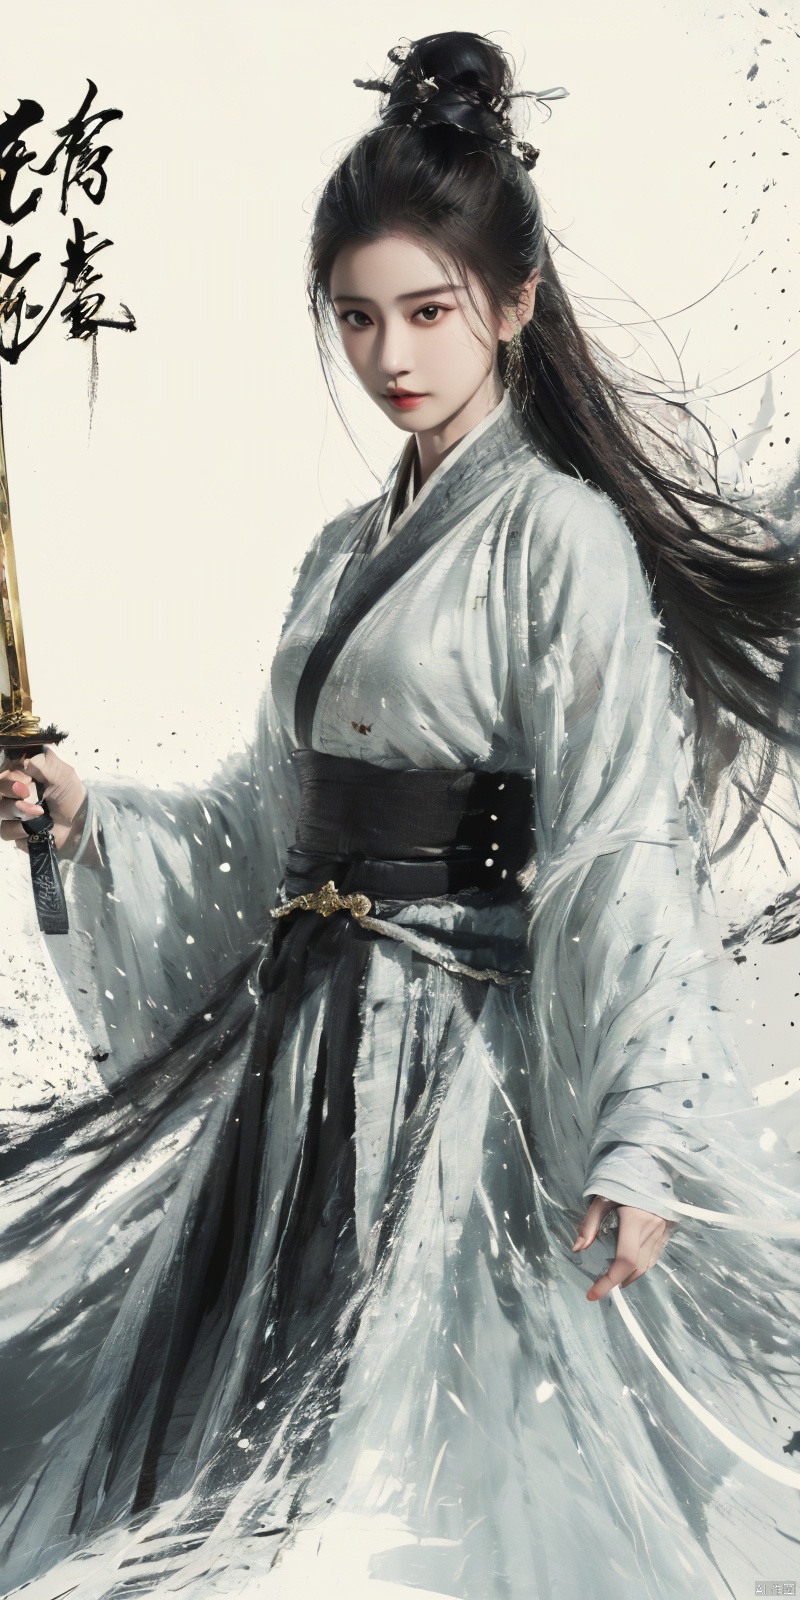  a woman with white hair holding a glowing ball in her hands, white haired deity, by Yang J, heise jinyao, inspired by Zhang Han, xianxia fantasy, flowing gold robes, inspired by Guan Daosheng, human and dragon fusion, cai xukun, inspired by Zhao Yuan, with long white hair, fantasy art style,,Ink scattering_Chinese style, smwuxia Chinese text blood weapon:sw, lotus leaf, (\shen ming shao nv\), gold armor, angel